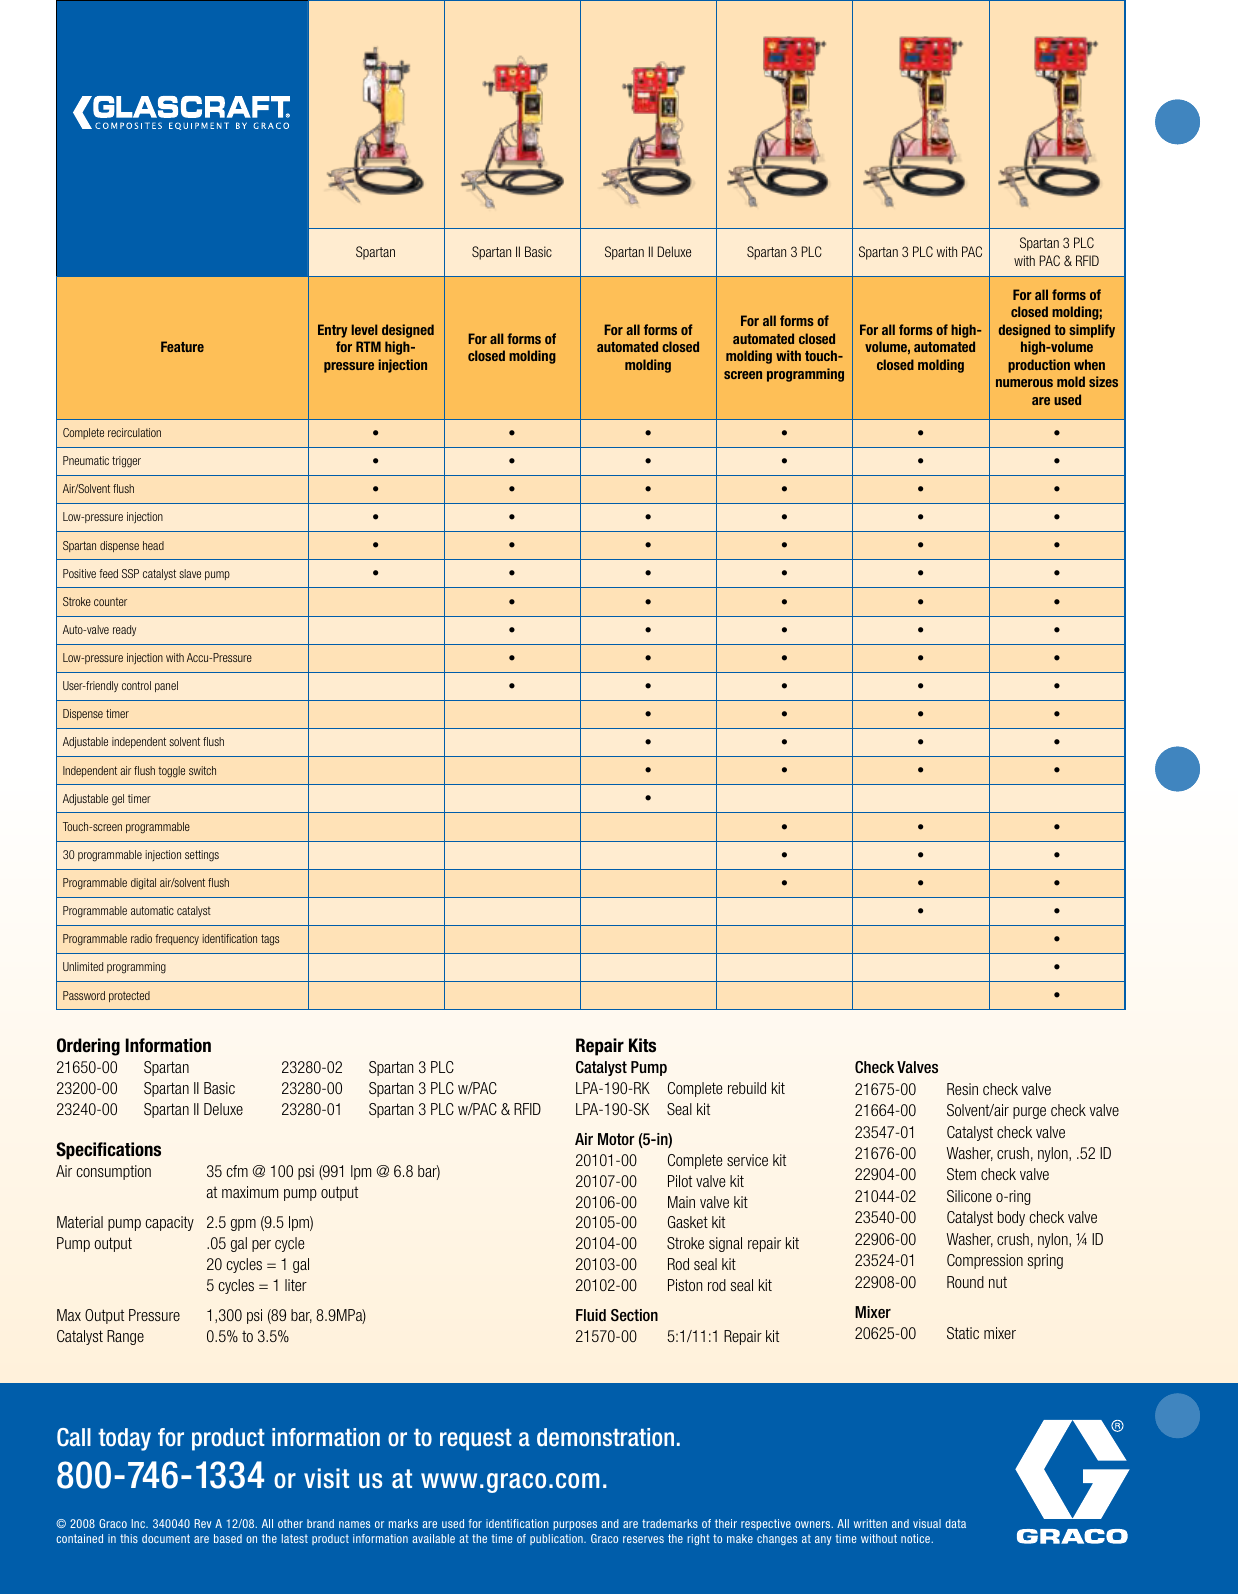 Page 4 of 4 - Graco Graco-Resin-Transfer-Molding-Systems-Users-Manual-  Graco-resin-transfer-molding-systems-users-manual